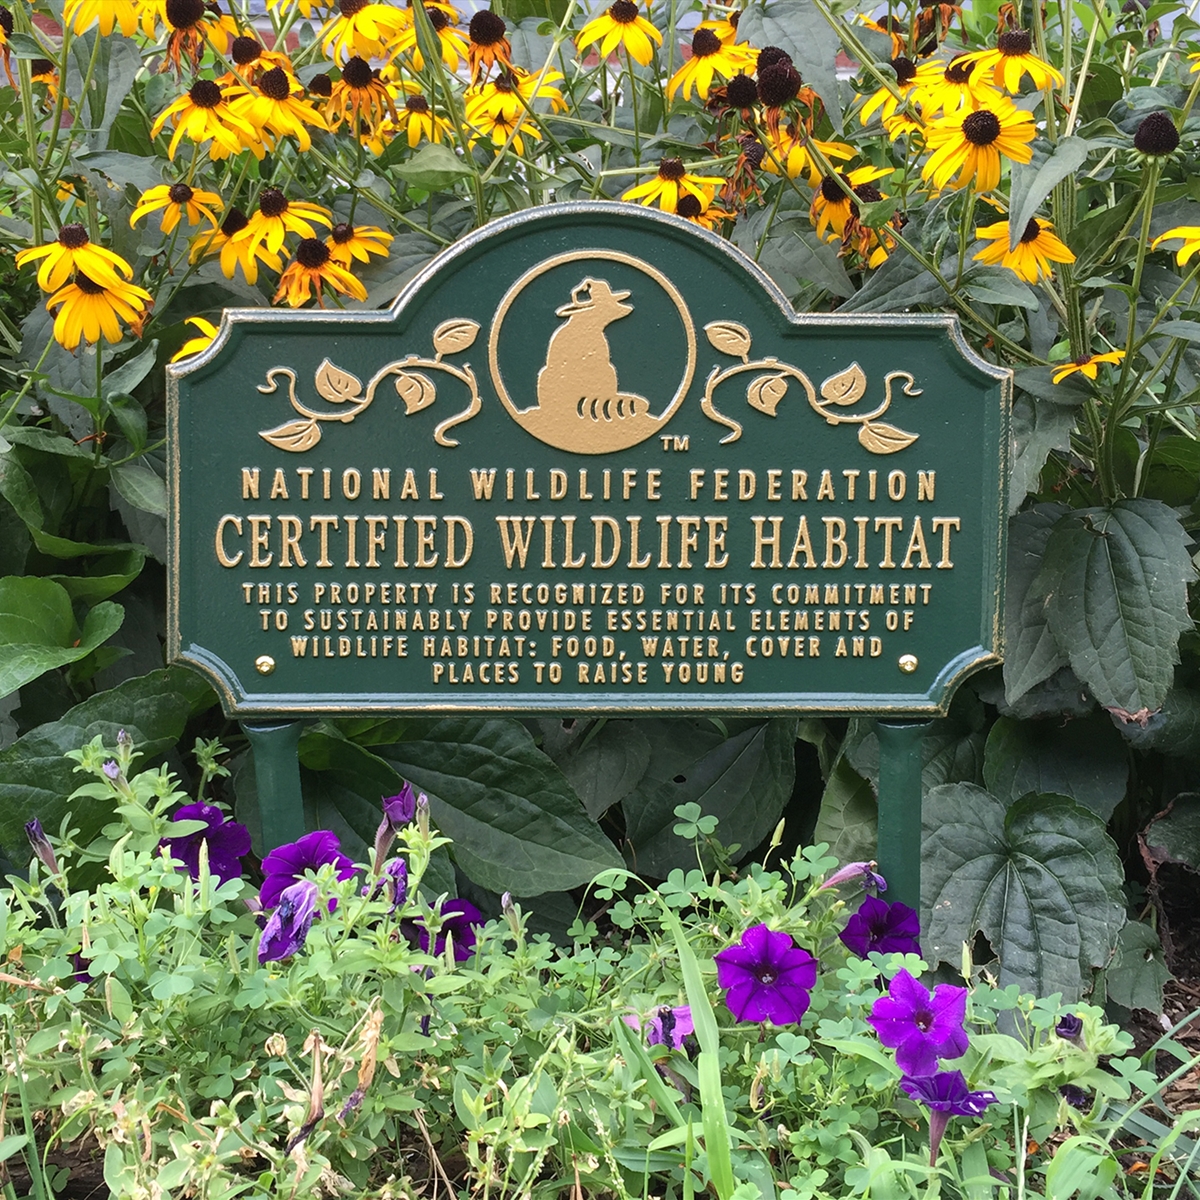 How to Turn Your Garden or Yard into a Certified Wildlife Habitat